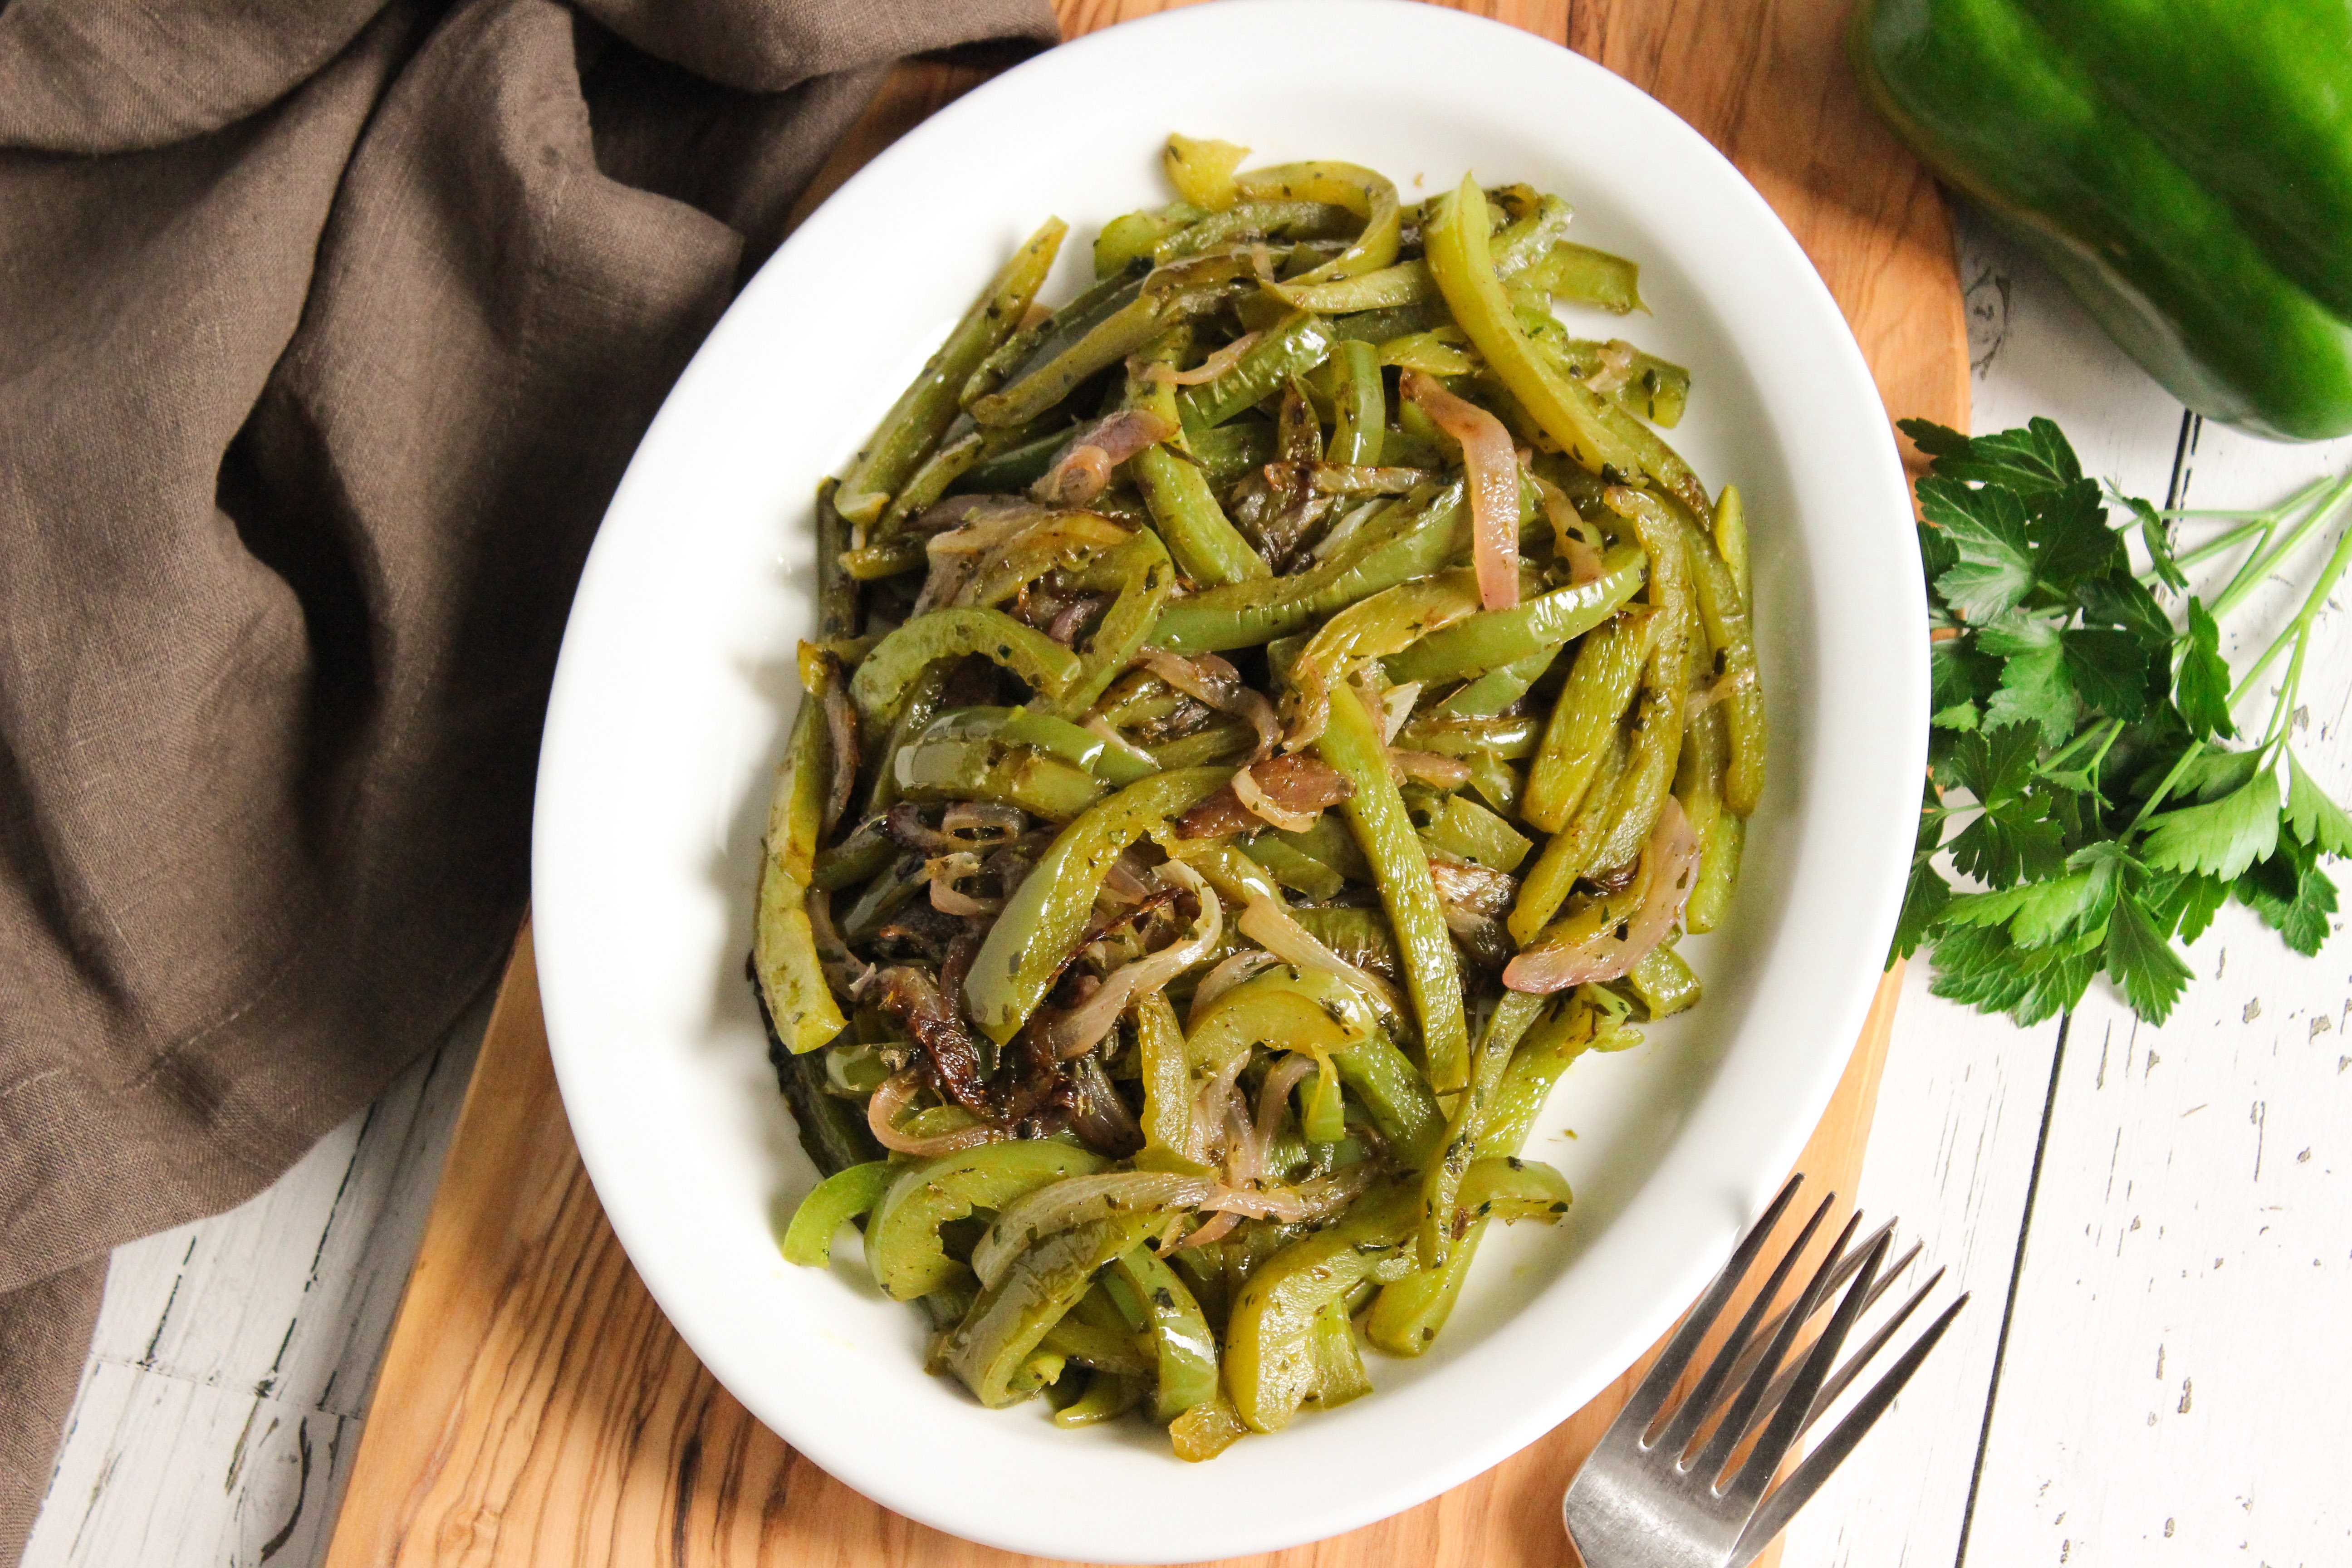 Sauteed green peppers